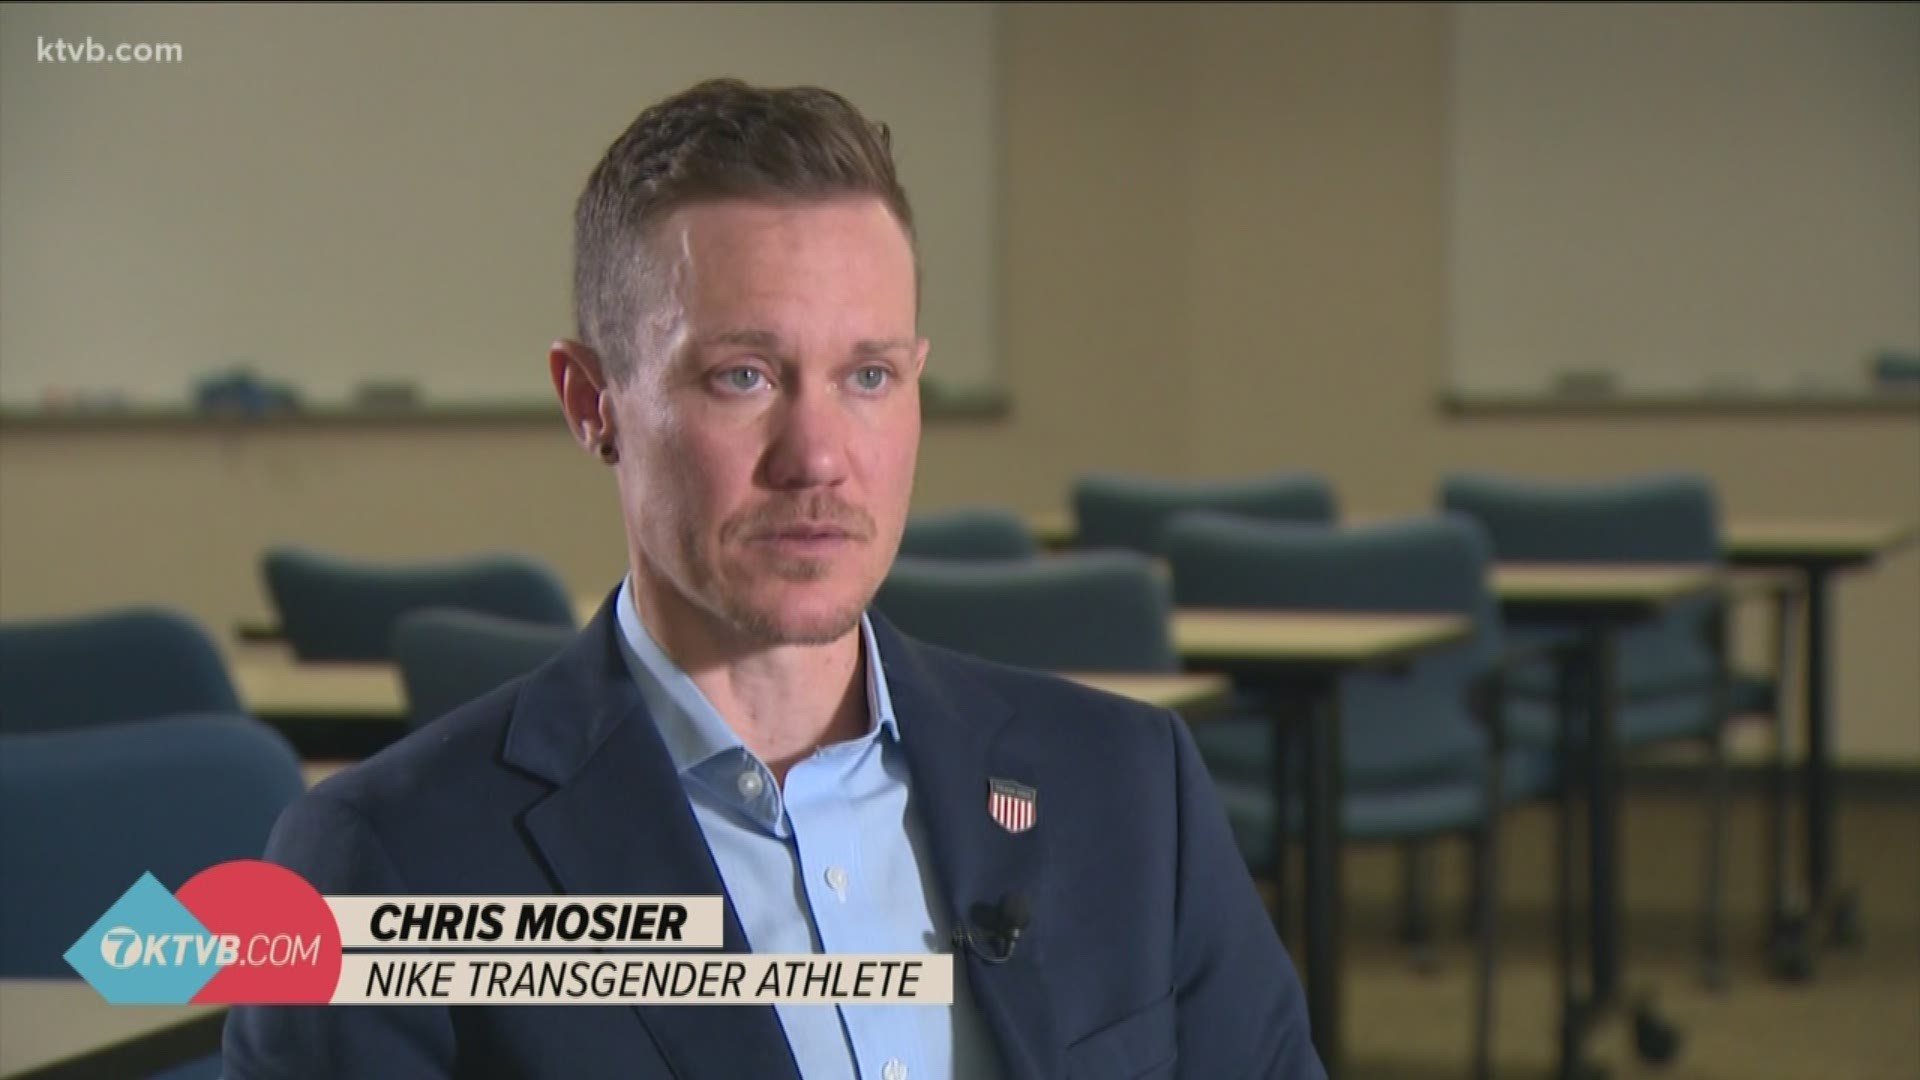 Chris Mosier is in town trying to stop state lawmakers from passing a ban that would keep transgender athletes from competing in girl's and women's sports.